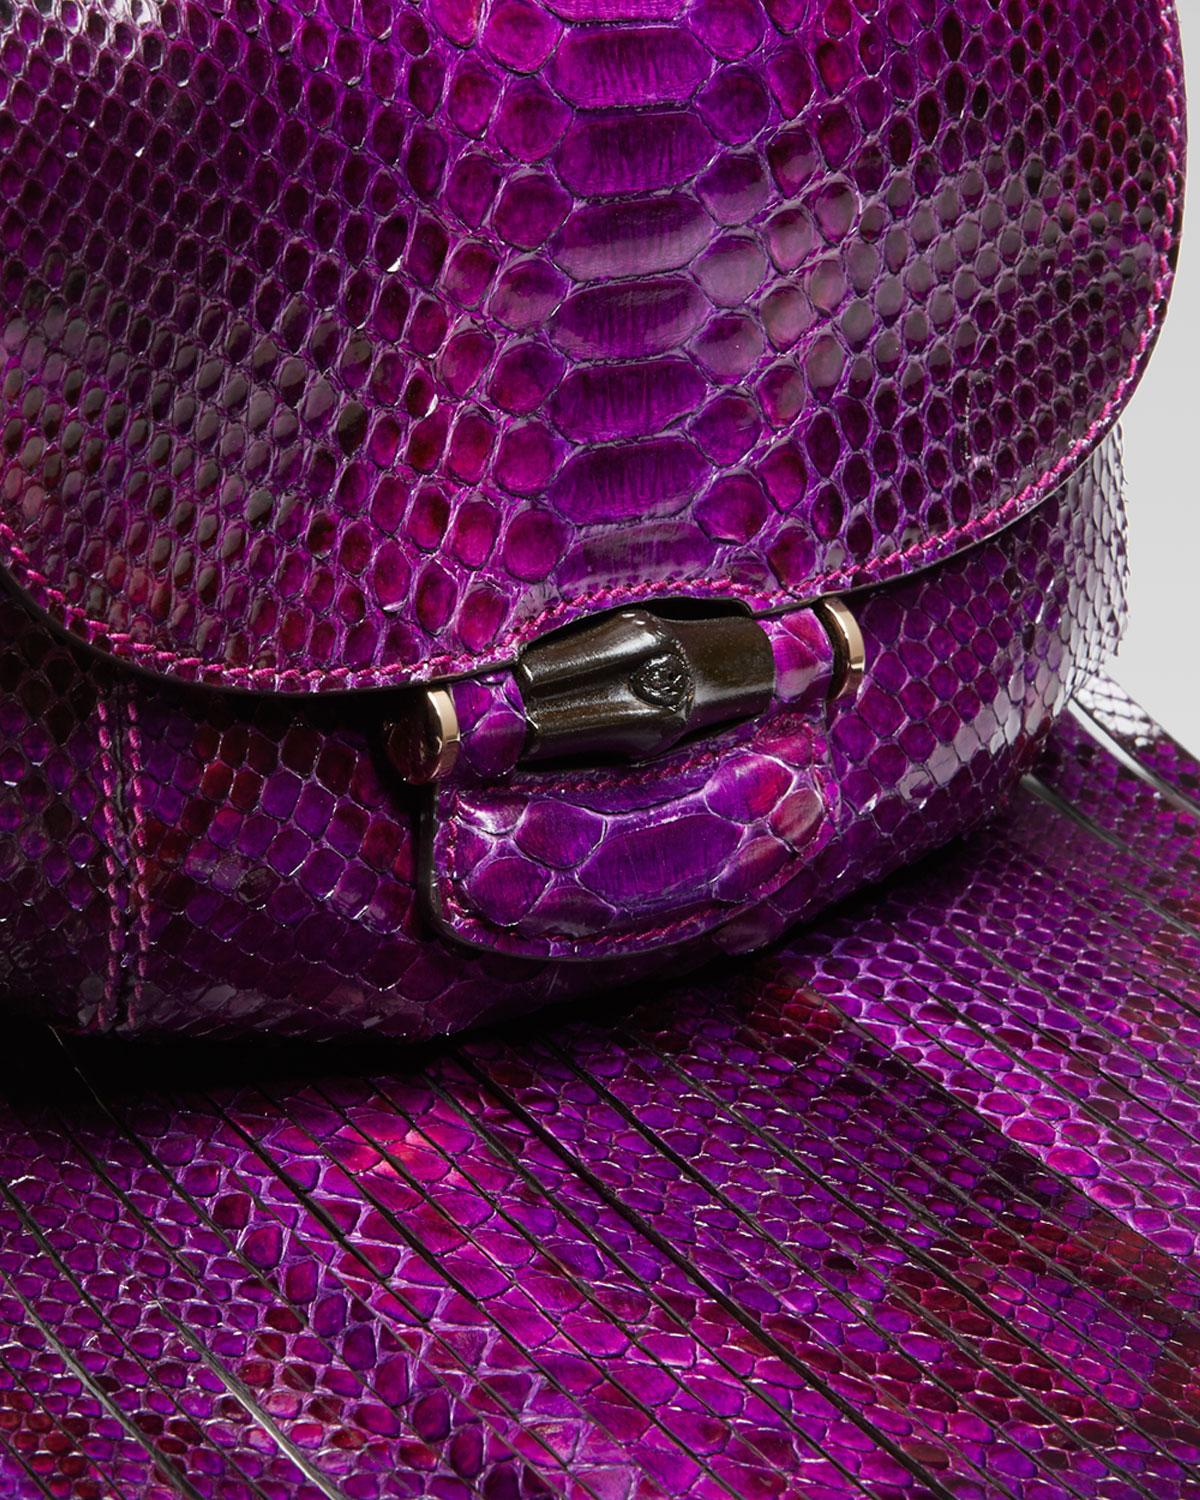 New Gucci Nouveau Python Fringe Bamboo Runway Bag in Plum $3100 5